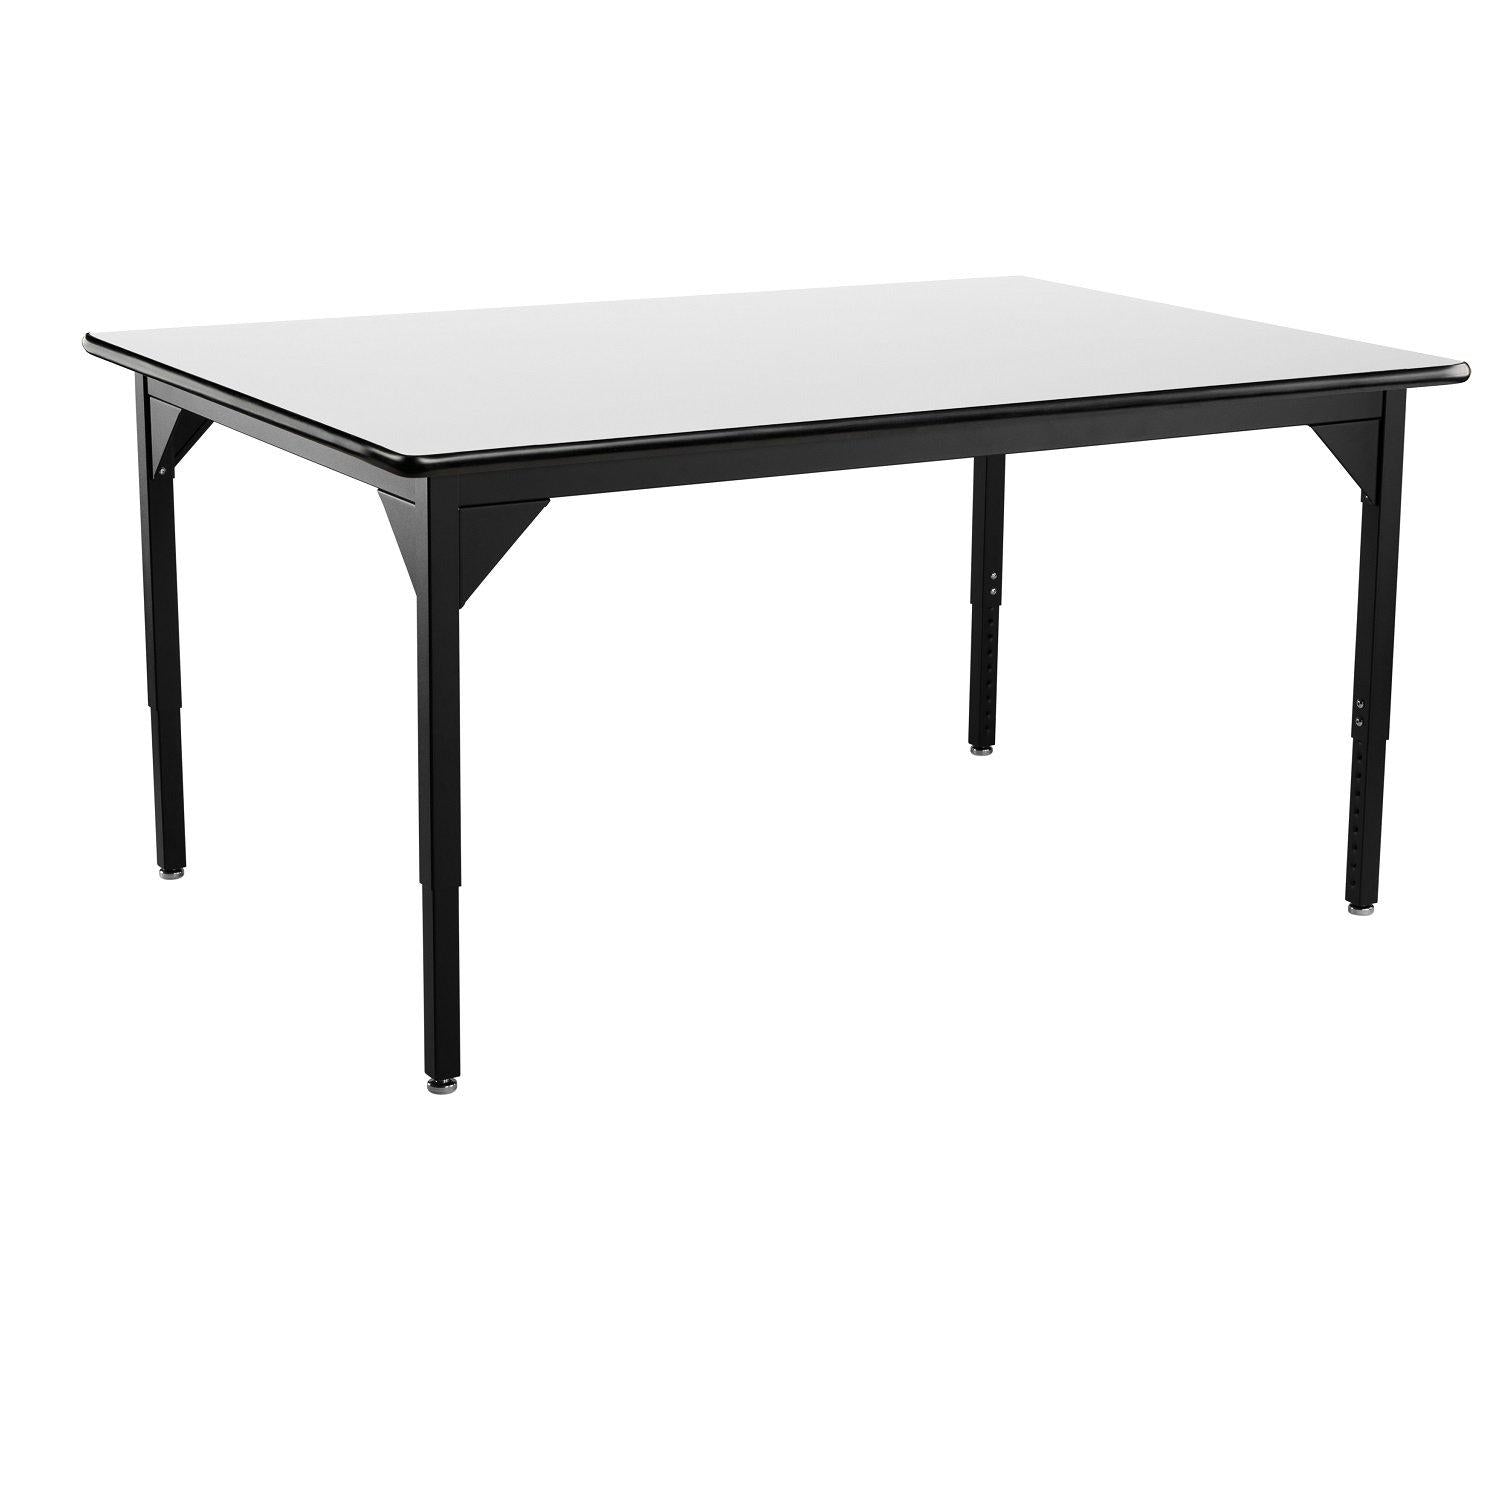 Heavy-Duty Height-Adjustable Utility Table, Black Frame, 48" x 60", Whiteboard High-Pressure Laminate Top